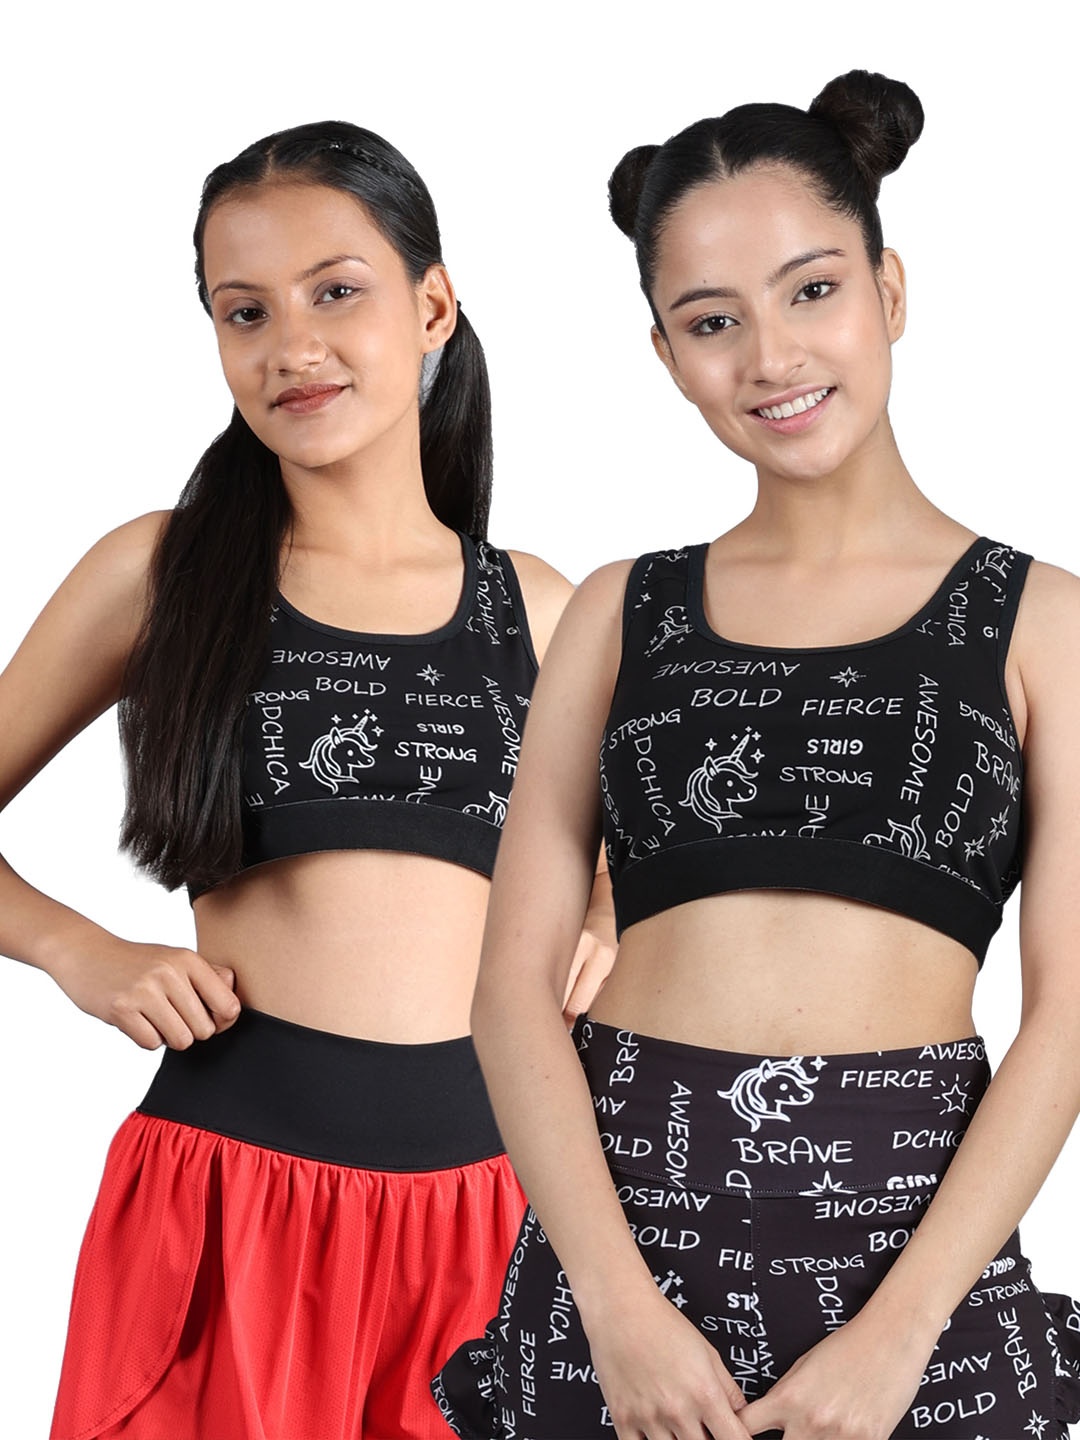 

DChica Girls Pack Of 2 Full Coverage Typography Printed Workout Bra With All Day Comfort, Black